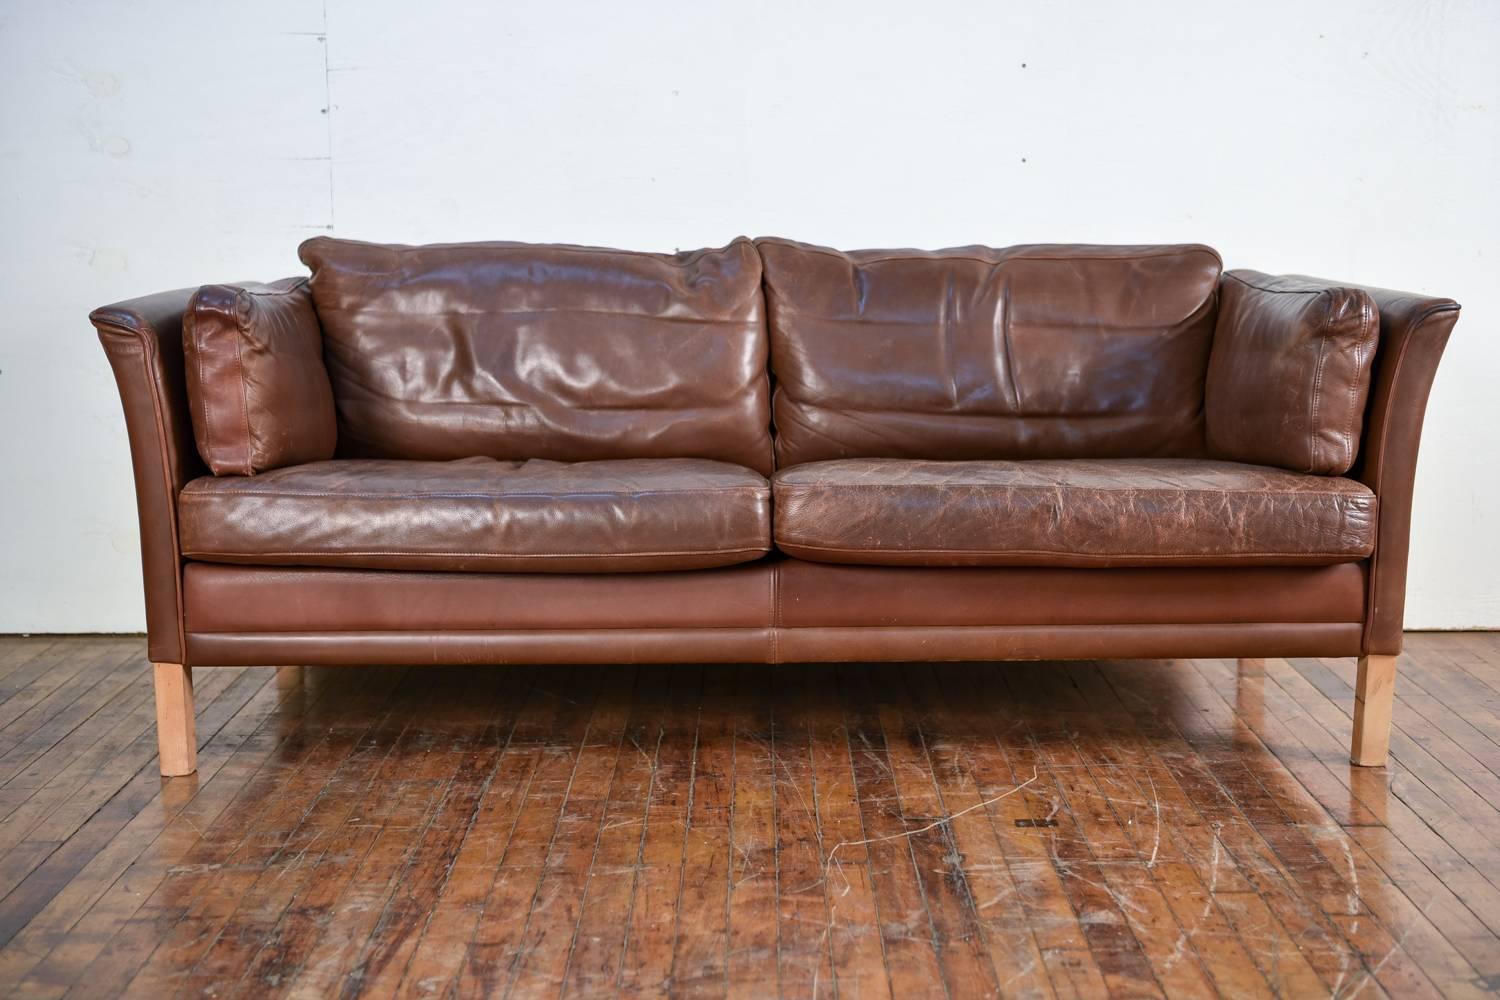 A two-seat sofa or loveseat designed by Mogens Hansen, model MH2225. Fantastic broken in leather.